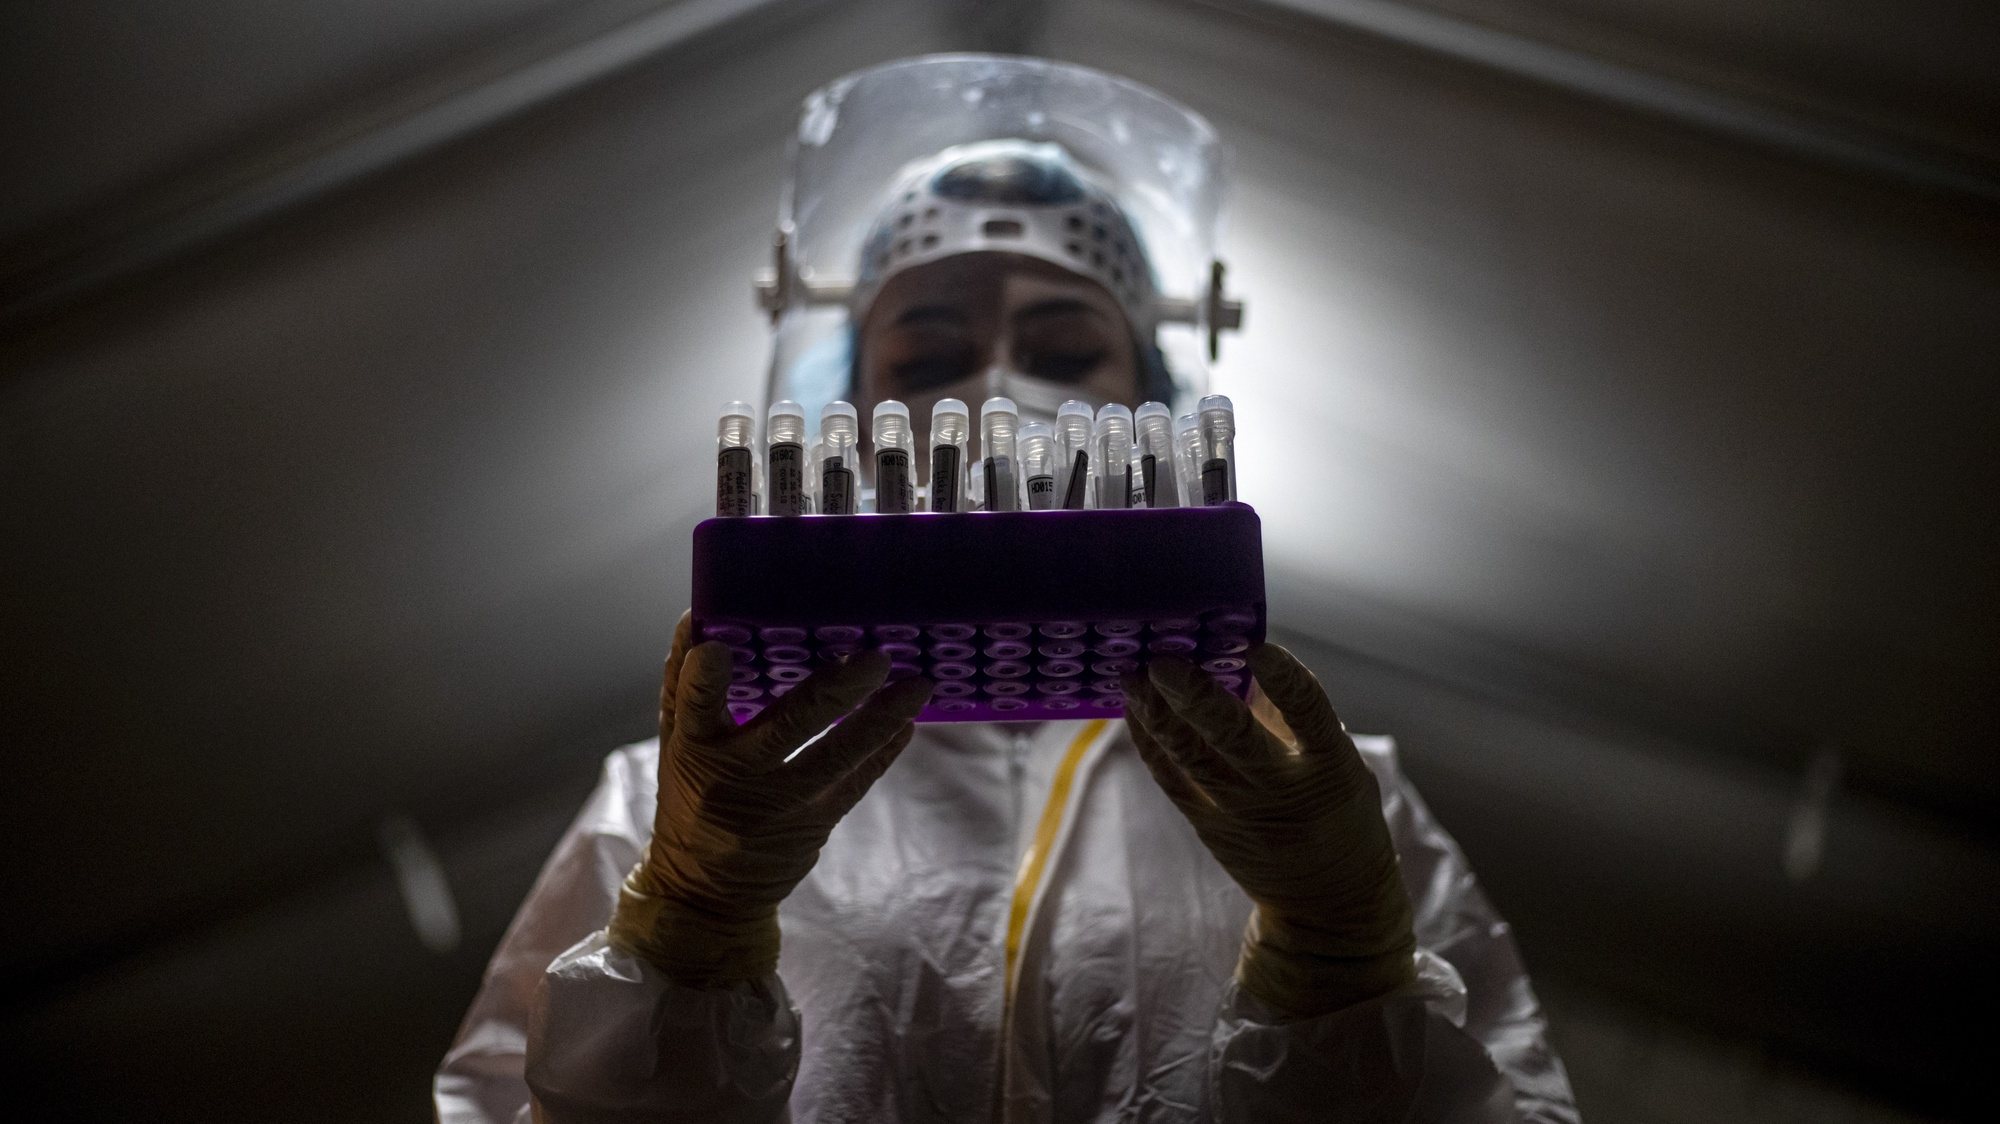 epa08980351 A medical worker wearing personal protective equipment (PPE) poses with swab samples at drive-in coronavirus testing station in Prague, Czech Republic, 01 February 2021. The Czech Republic has seen a stagnating trend in new SARS-CoV-2 infections as Czech government announced on 28 January 2021 new measures in connection with the COVID-19 pandemic.  EPA/MARTIN DIVISEK